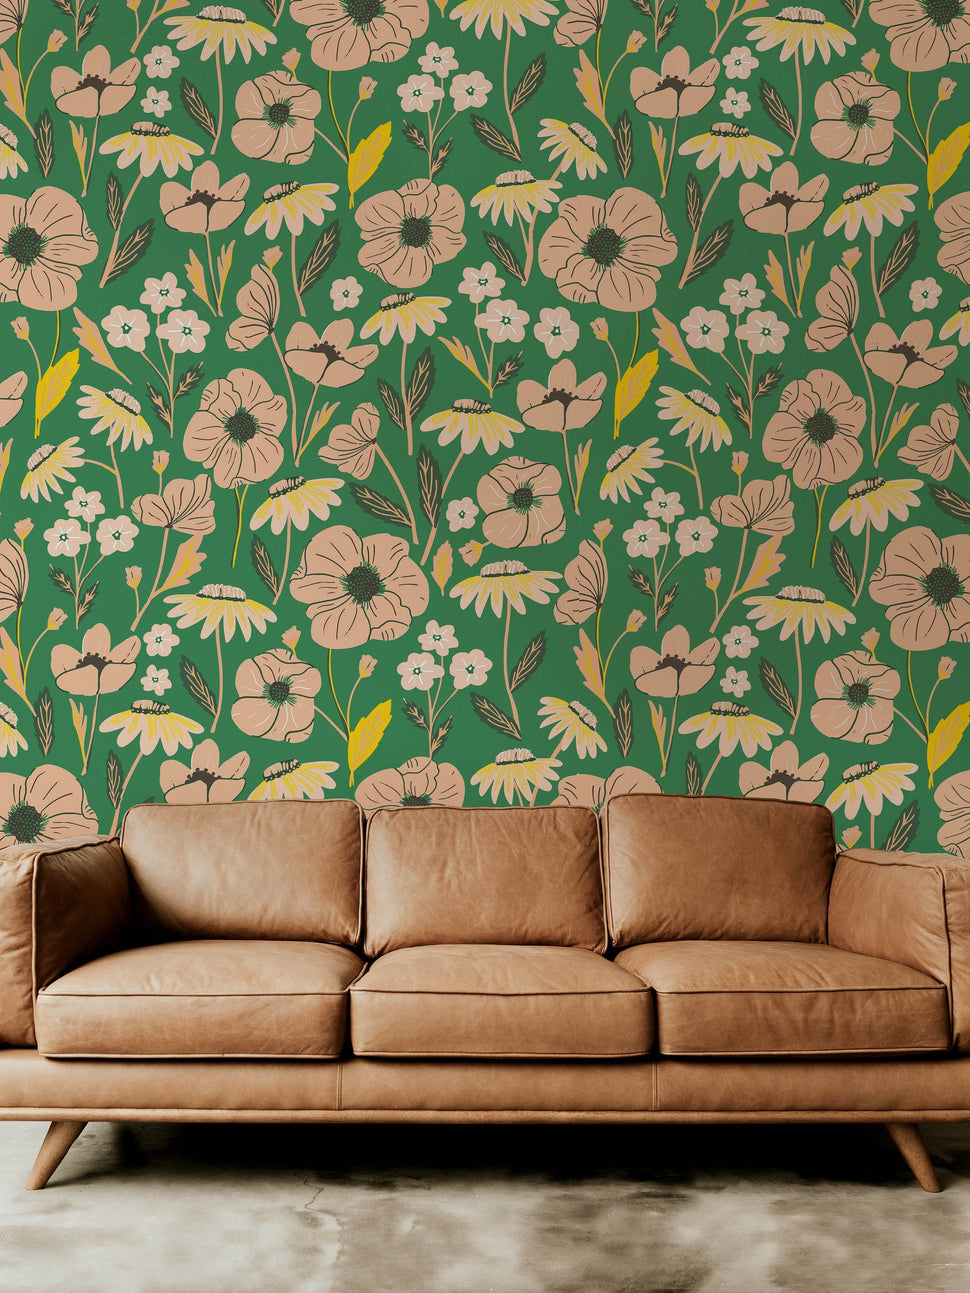 Green Pink Floral Wallpaper | Removable Wallpaper | Peel And Stick ...